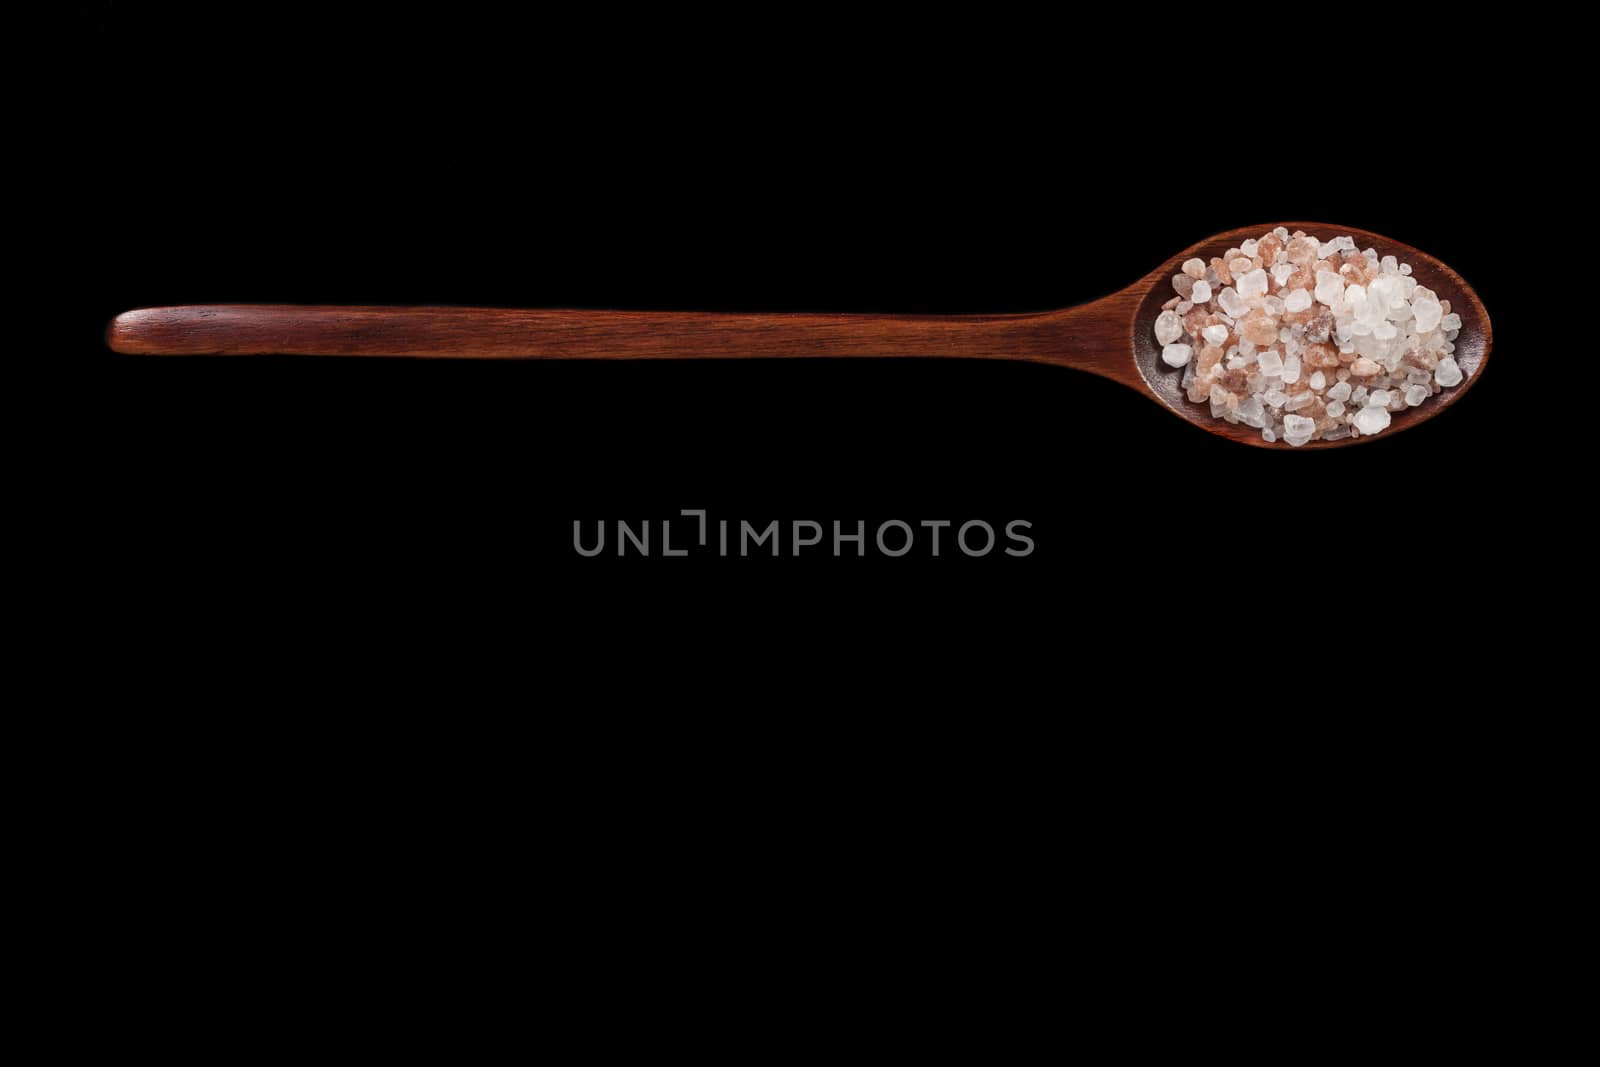 Wood Spoon Full With Himalayan Salt on Black Background